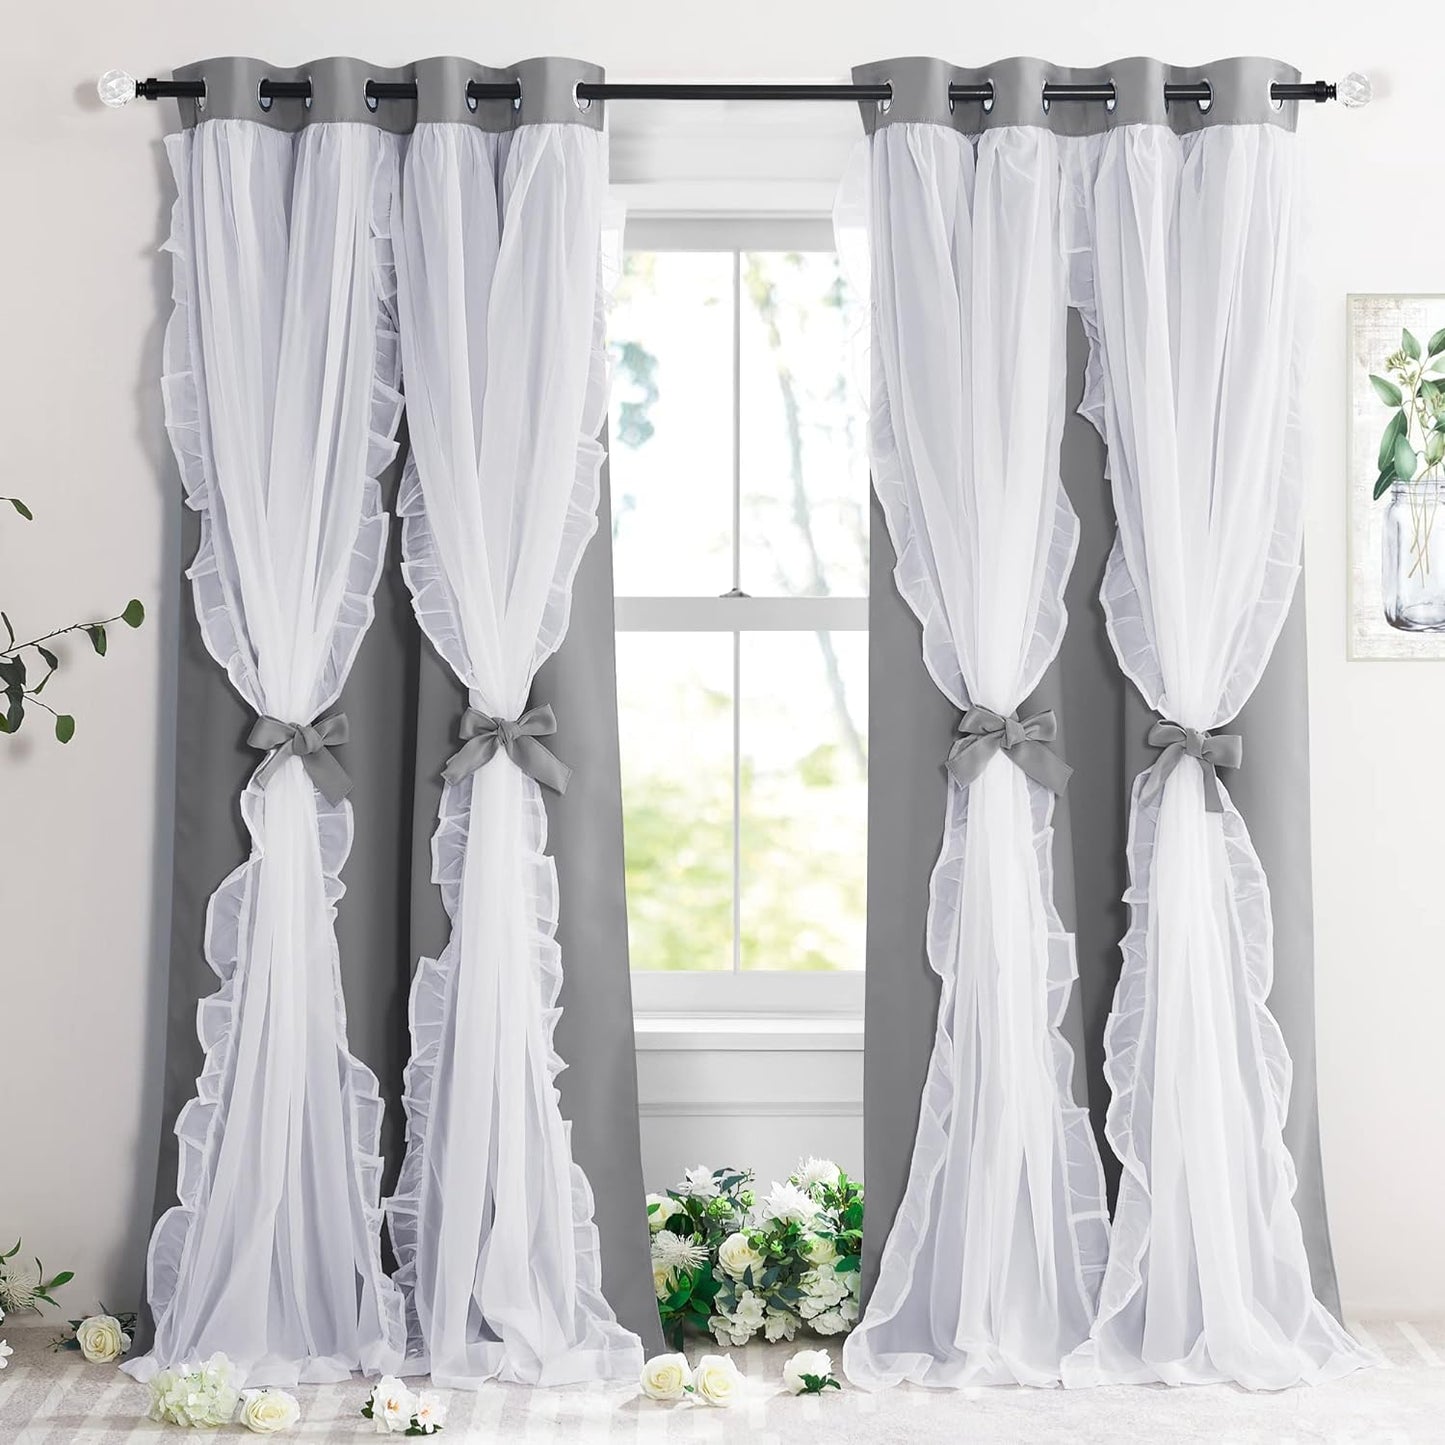 PONY DANCE Blackout Curtains for Living Room Decor Window Treatment Double Layer Drapes Ruffle Sheer Overlay Farmhouse Rustic Design, W 52 X L 84 Inches, Sage Green, 2 Panels  PONY DANCE Silver Grey 52" X 108" 